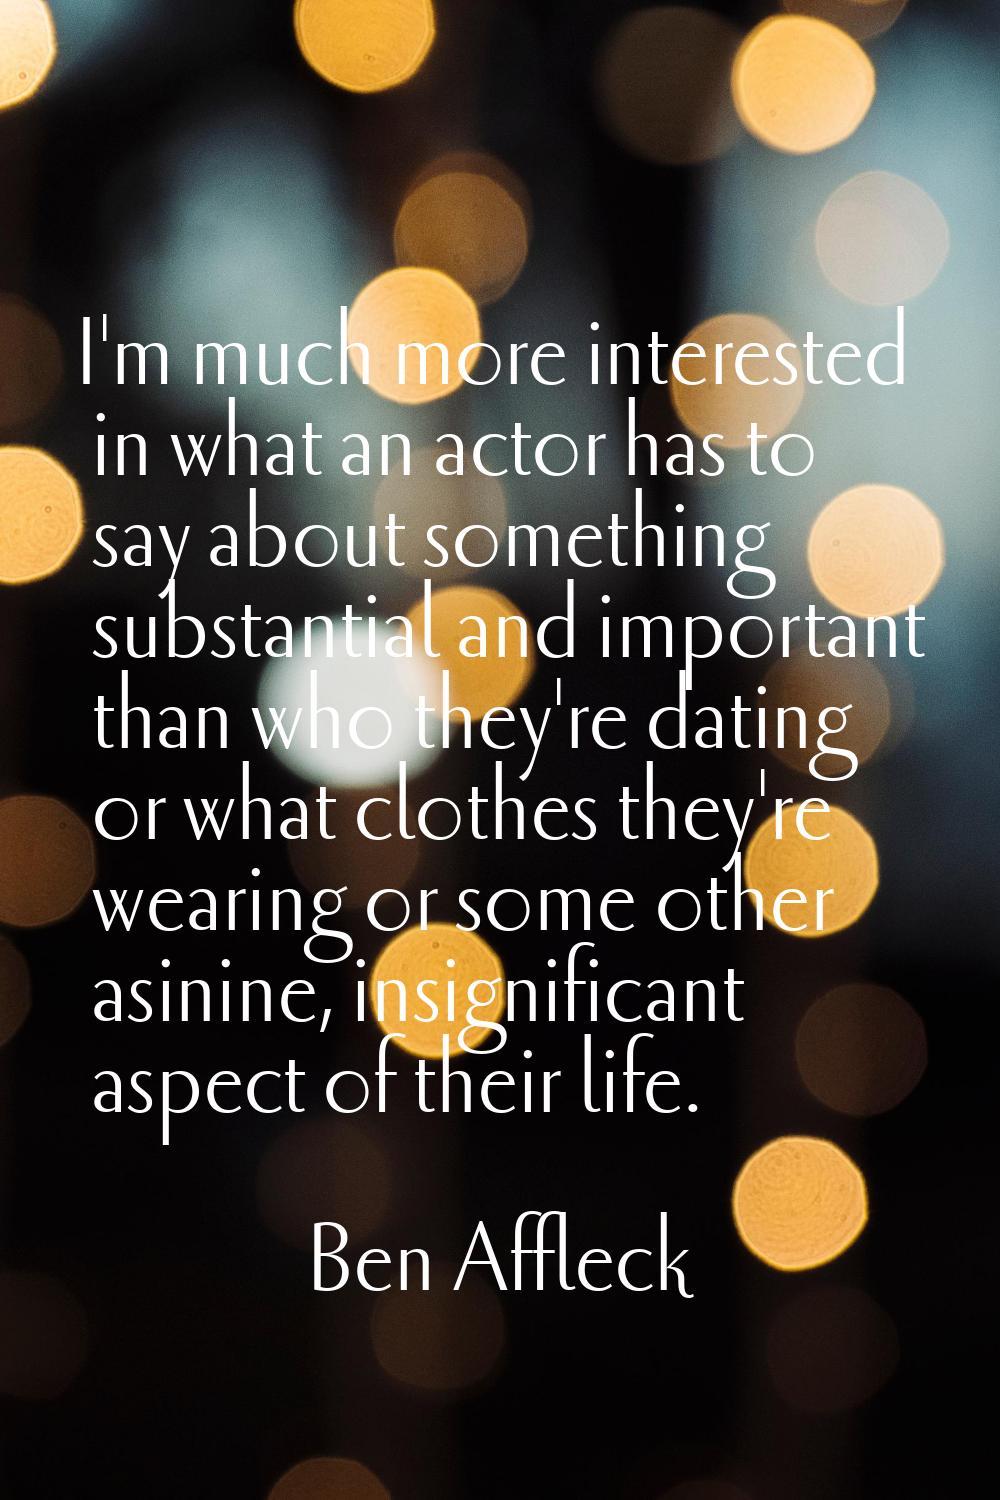 I'm much more interested in what an actor has to say about something substantial and important than